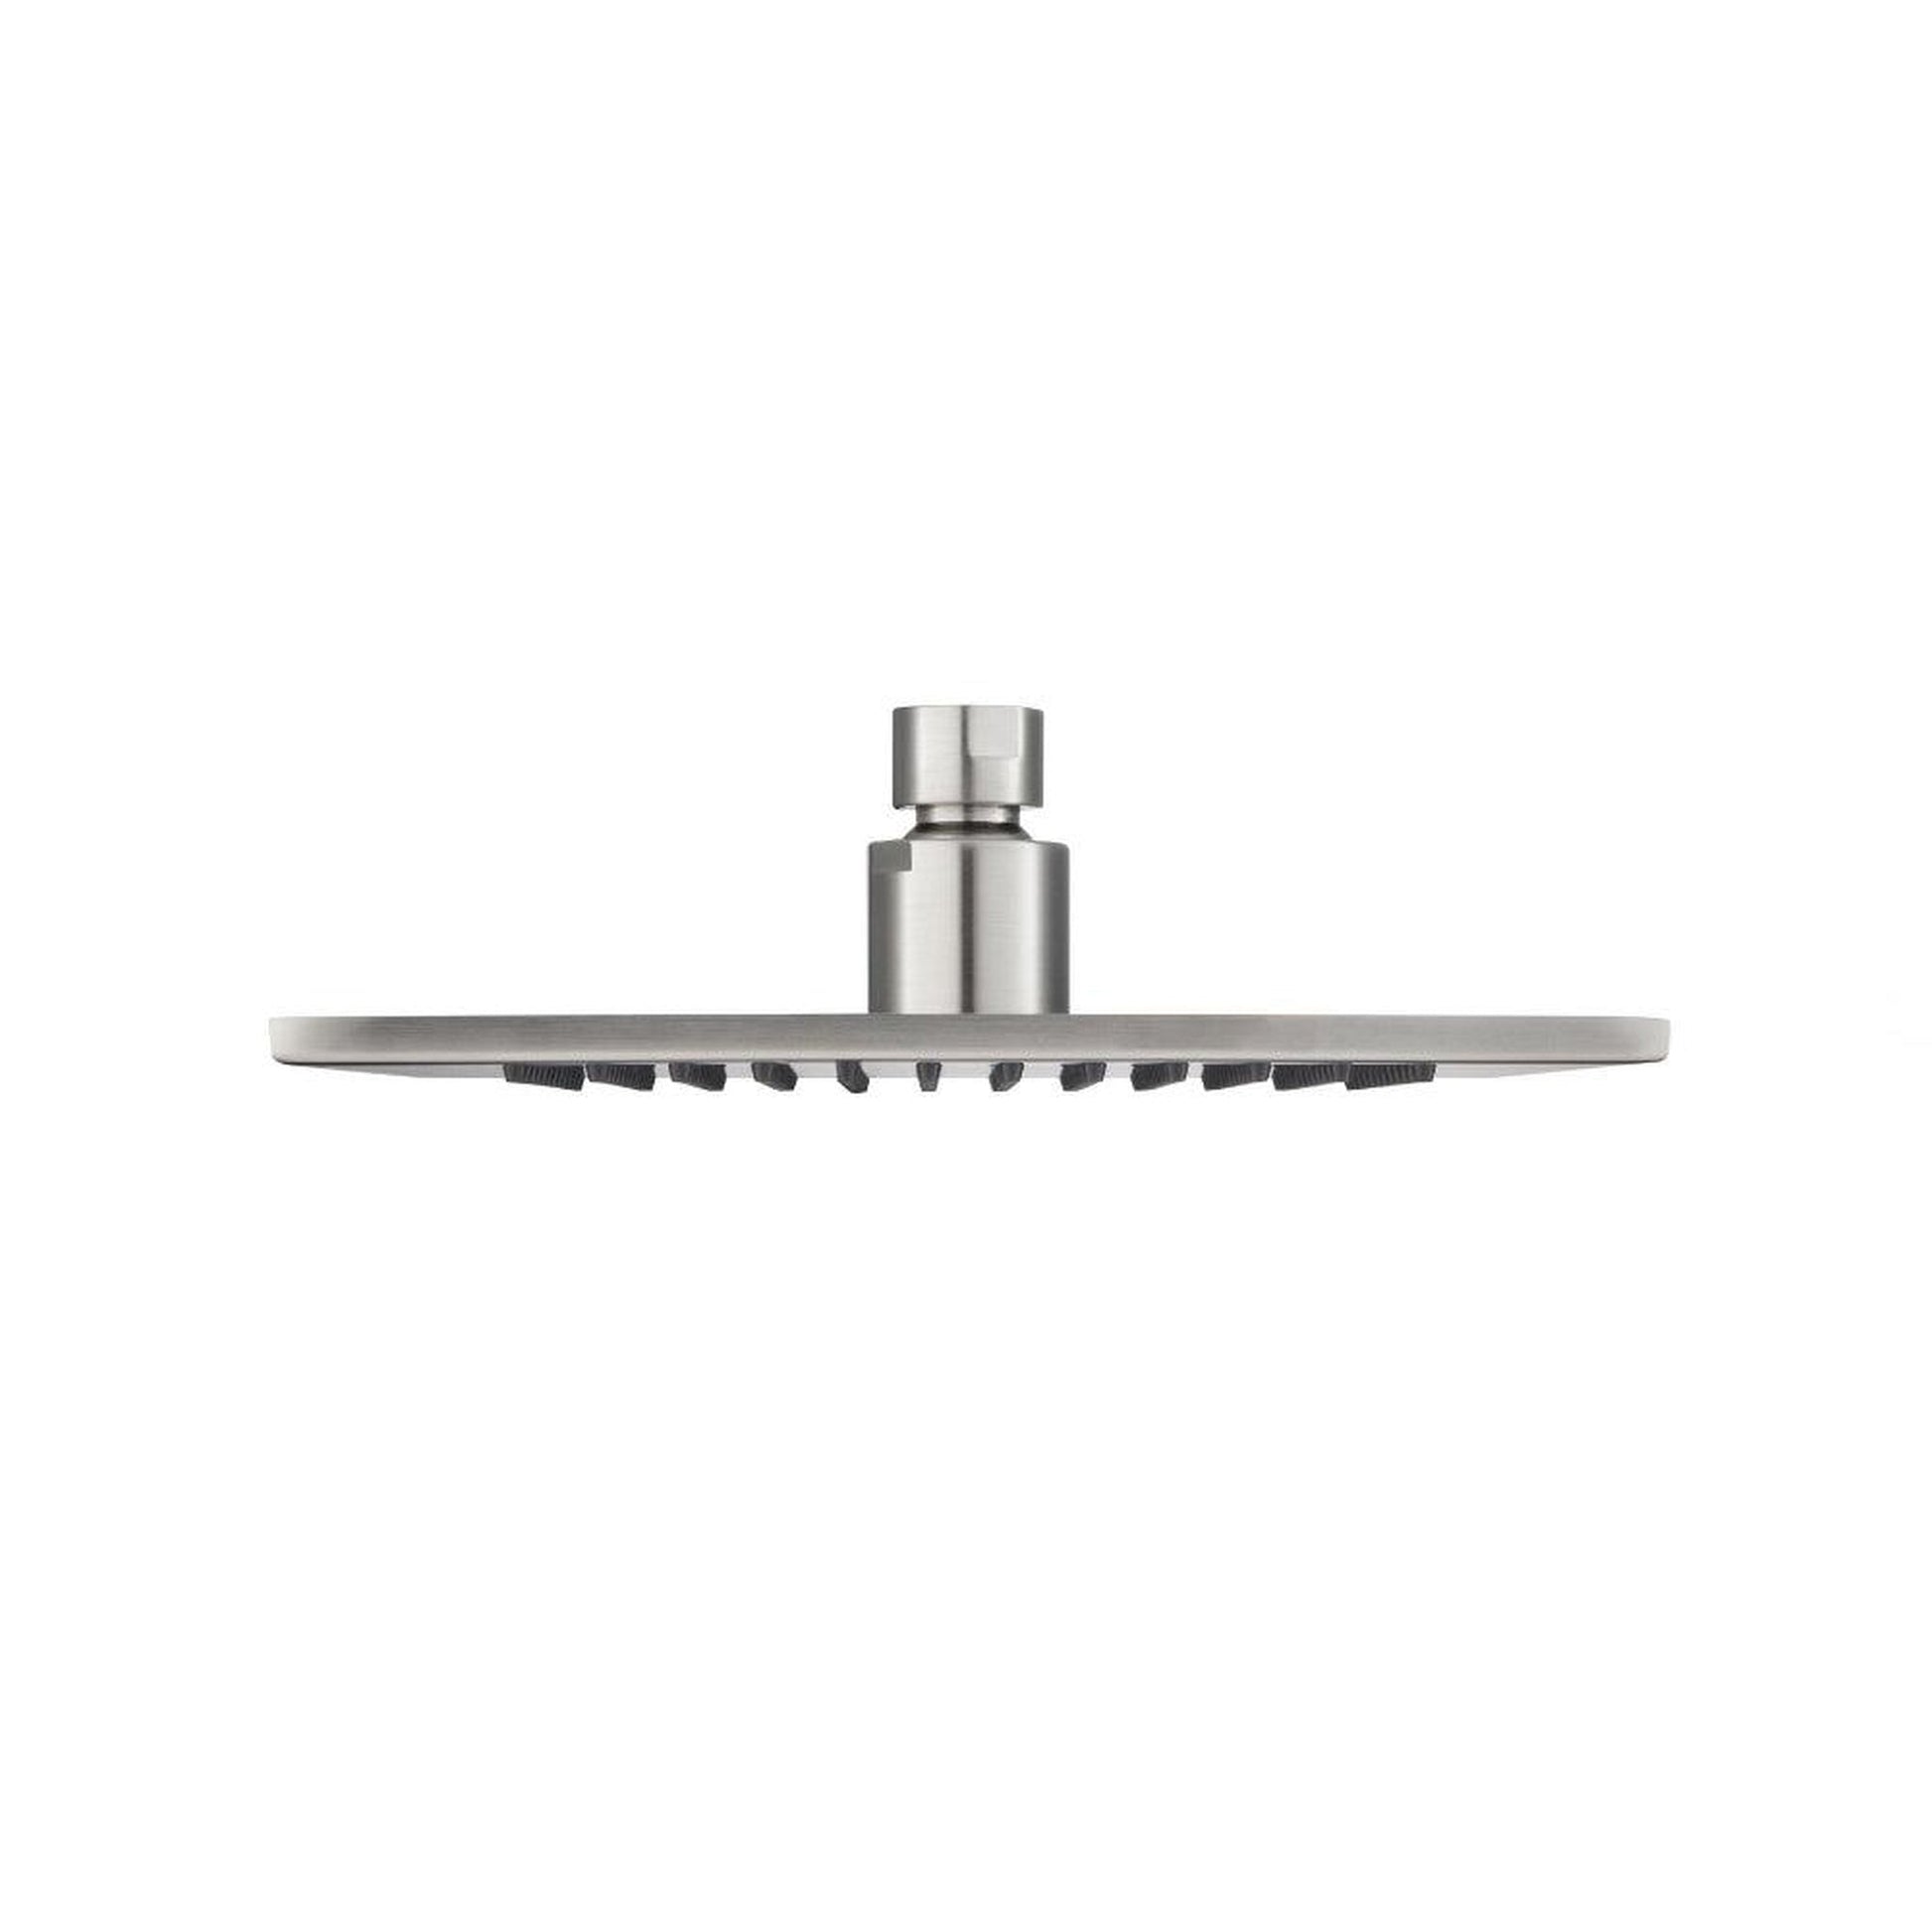 Isenberg Serie 160 Single Output Brushed Nickel PVD Wall-Mounted Shower Set With Single Function Square Rain Shower Head, Two-Handle Shower Trim and 1-Output Wall-Mounted Thermostatic Shower Valve With Integrated Volume Control